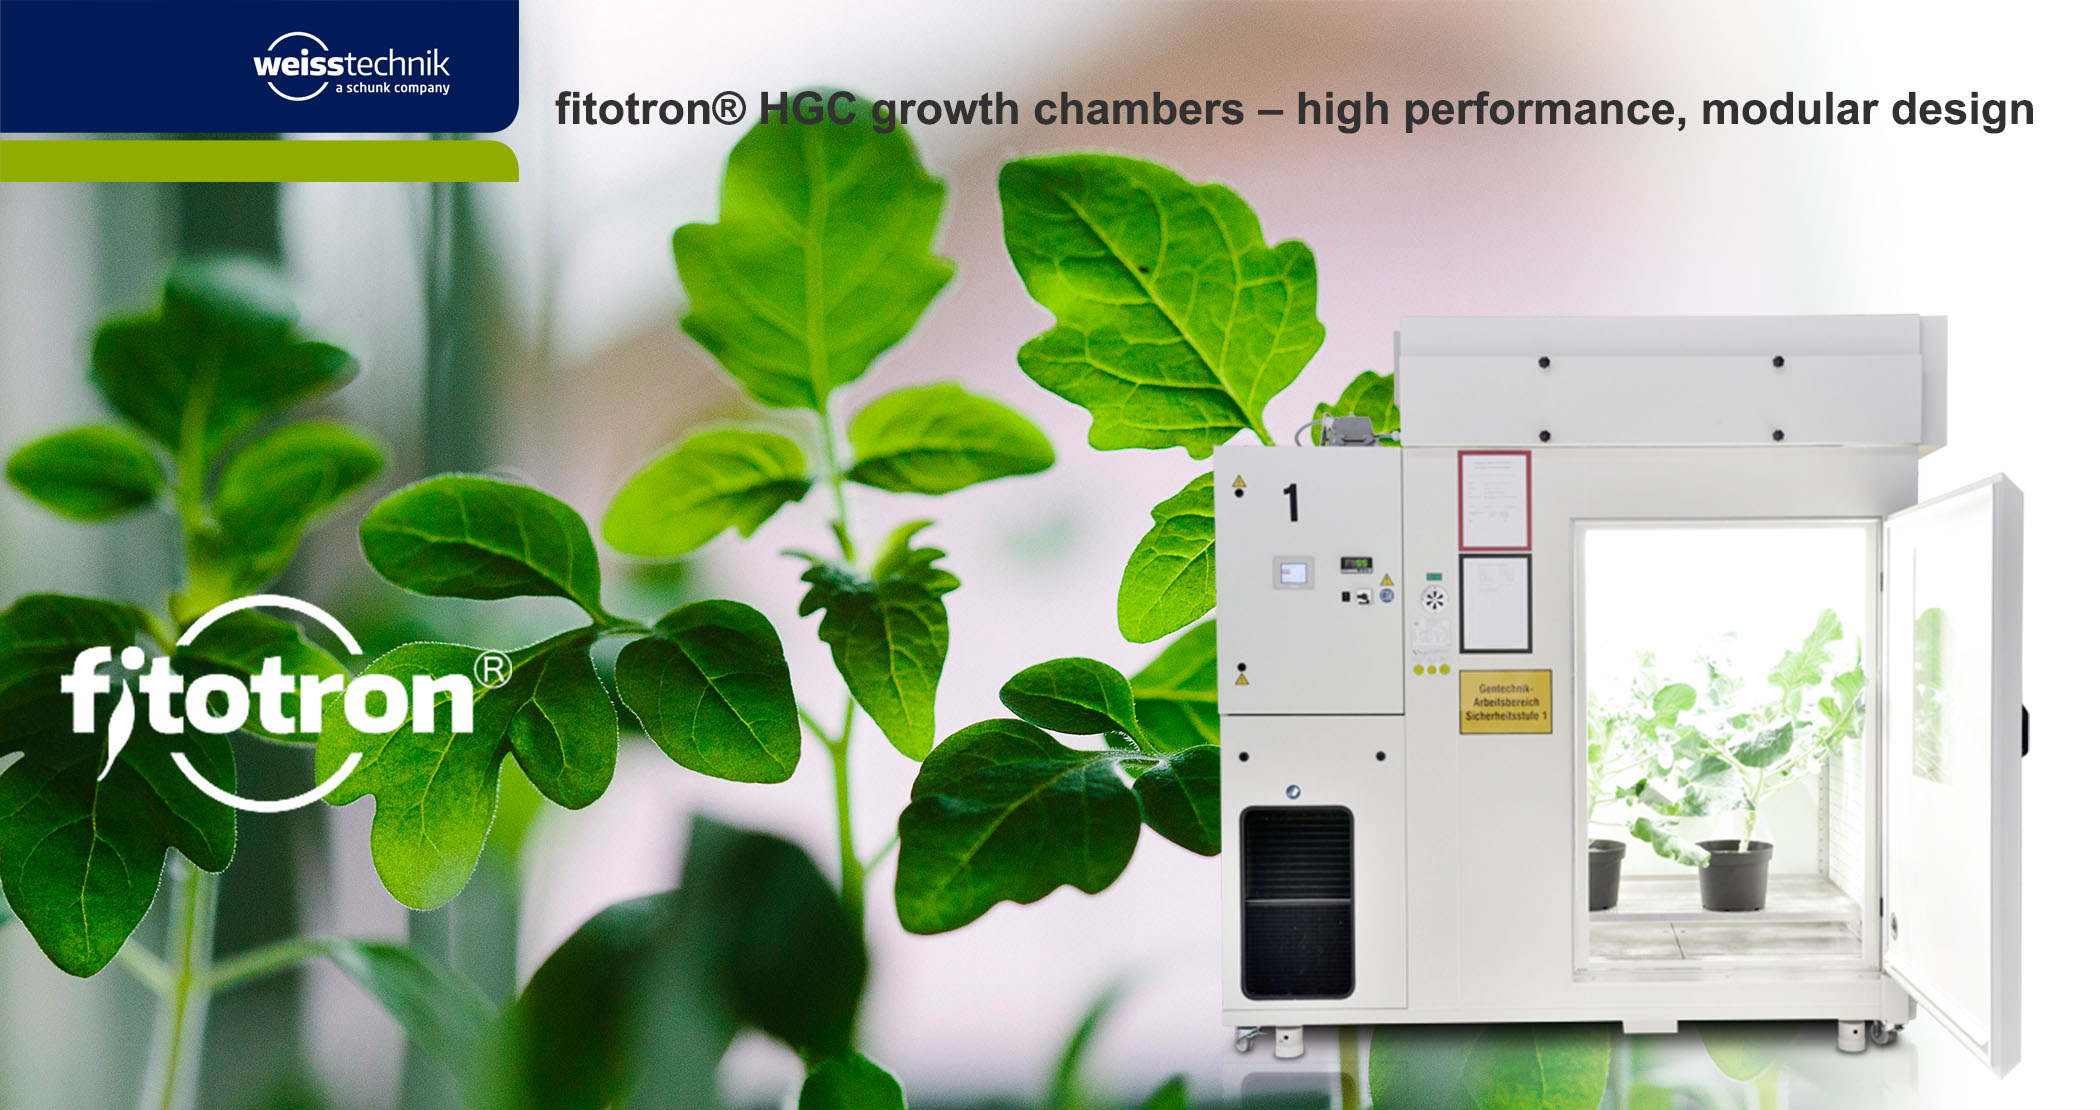 Fitotron HGC modular plant growth chambers